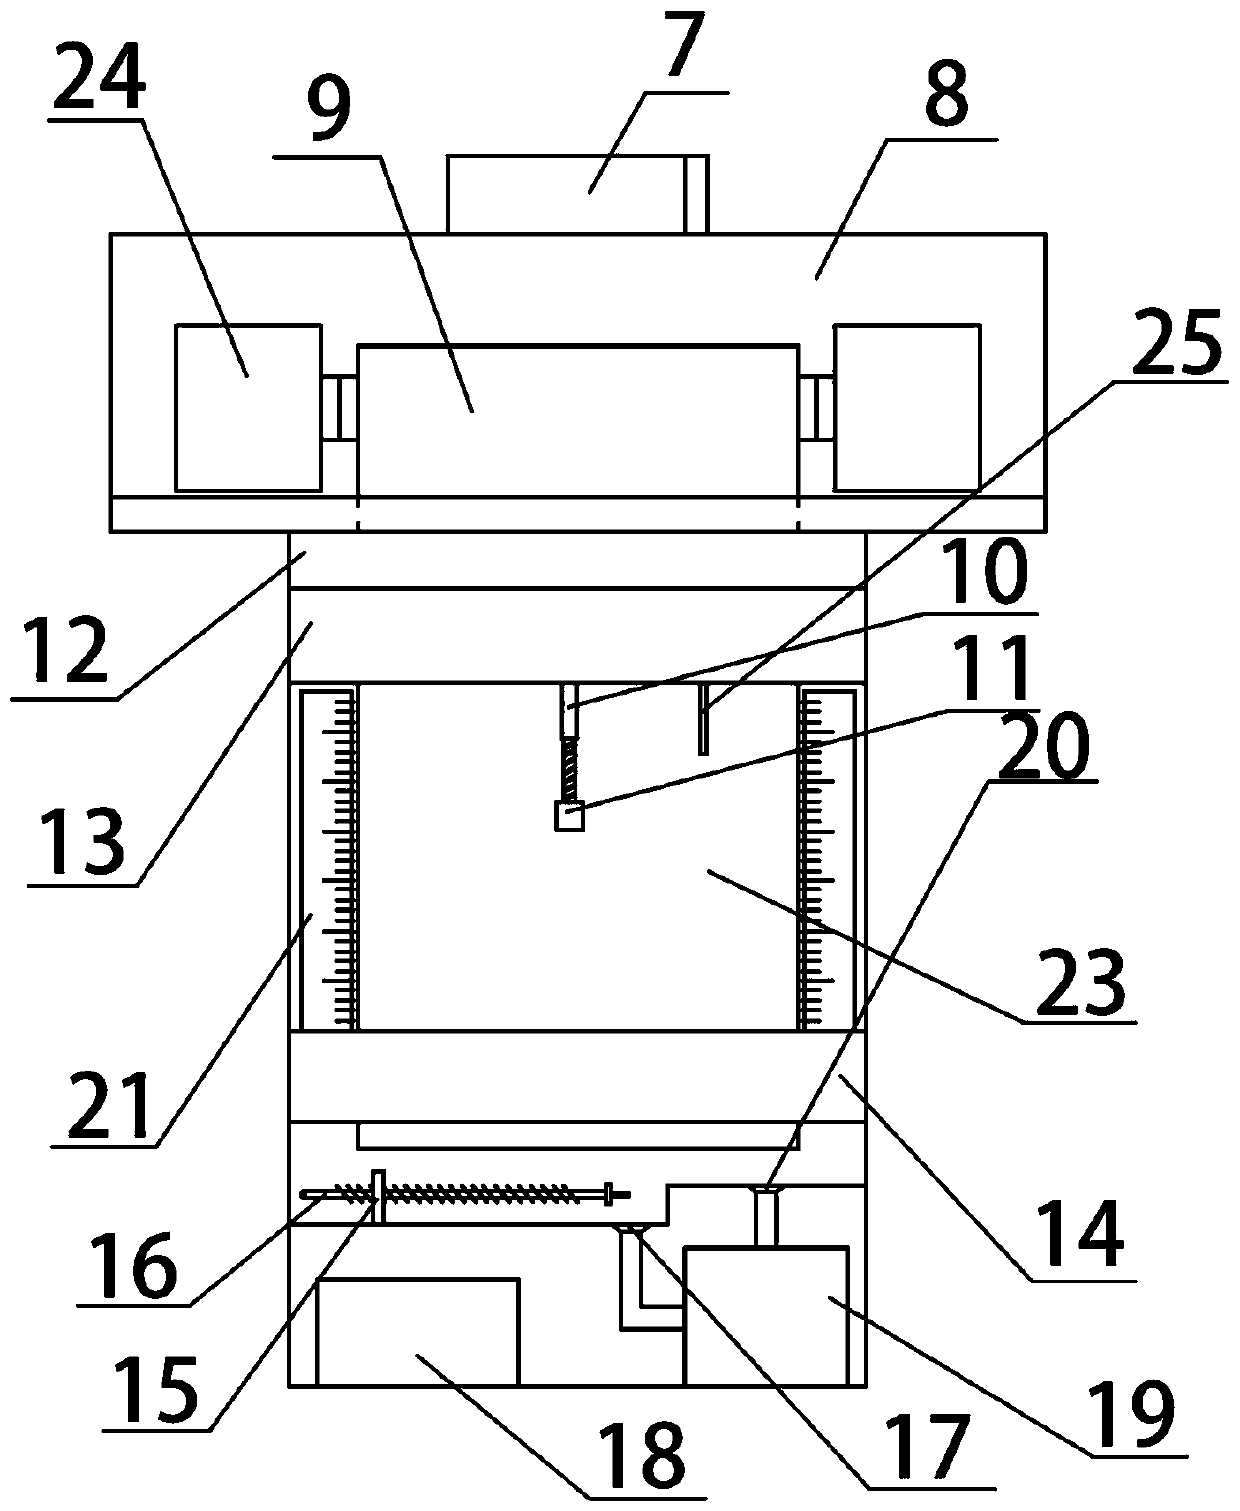 Vertical method fabric capillary effect evaluation device